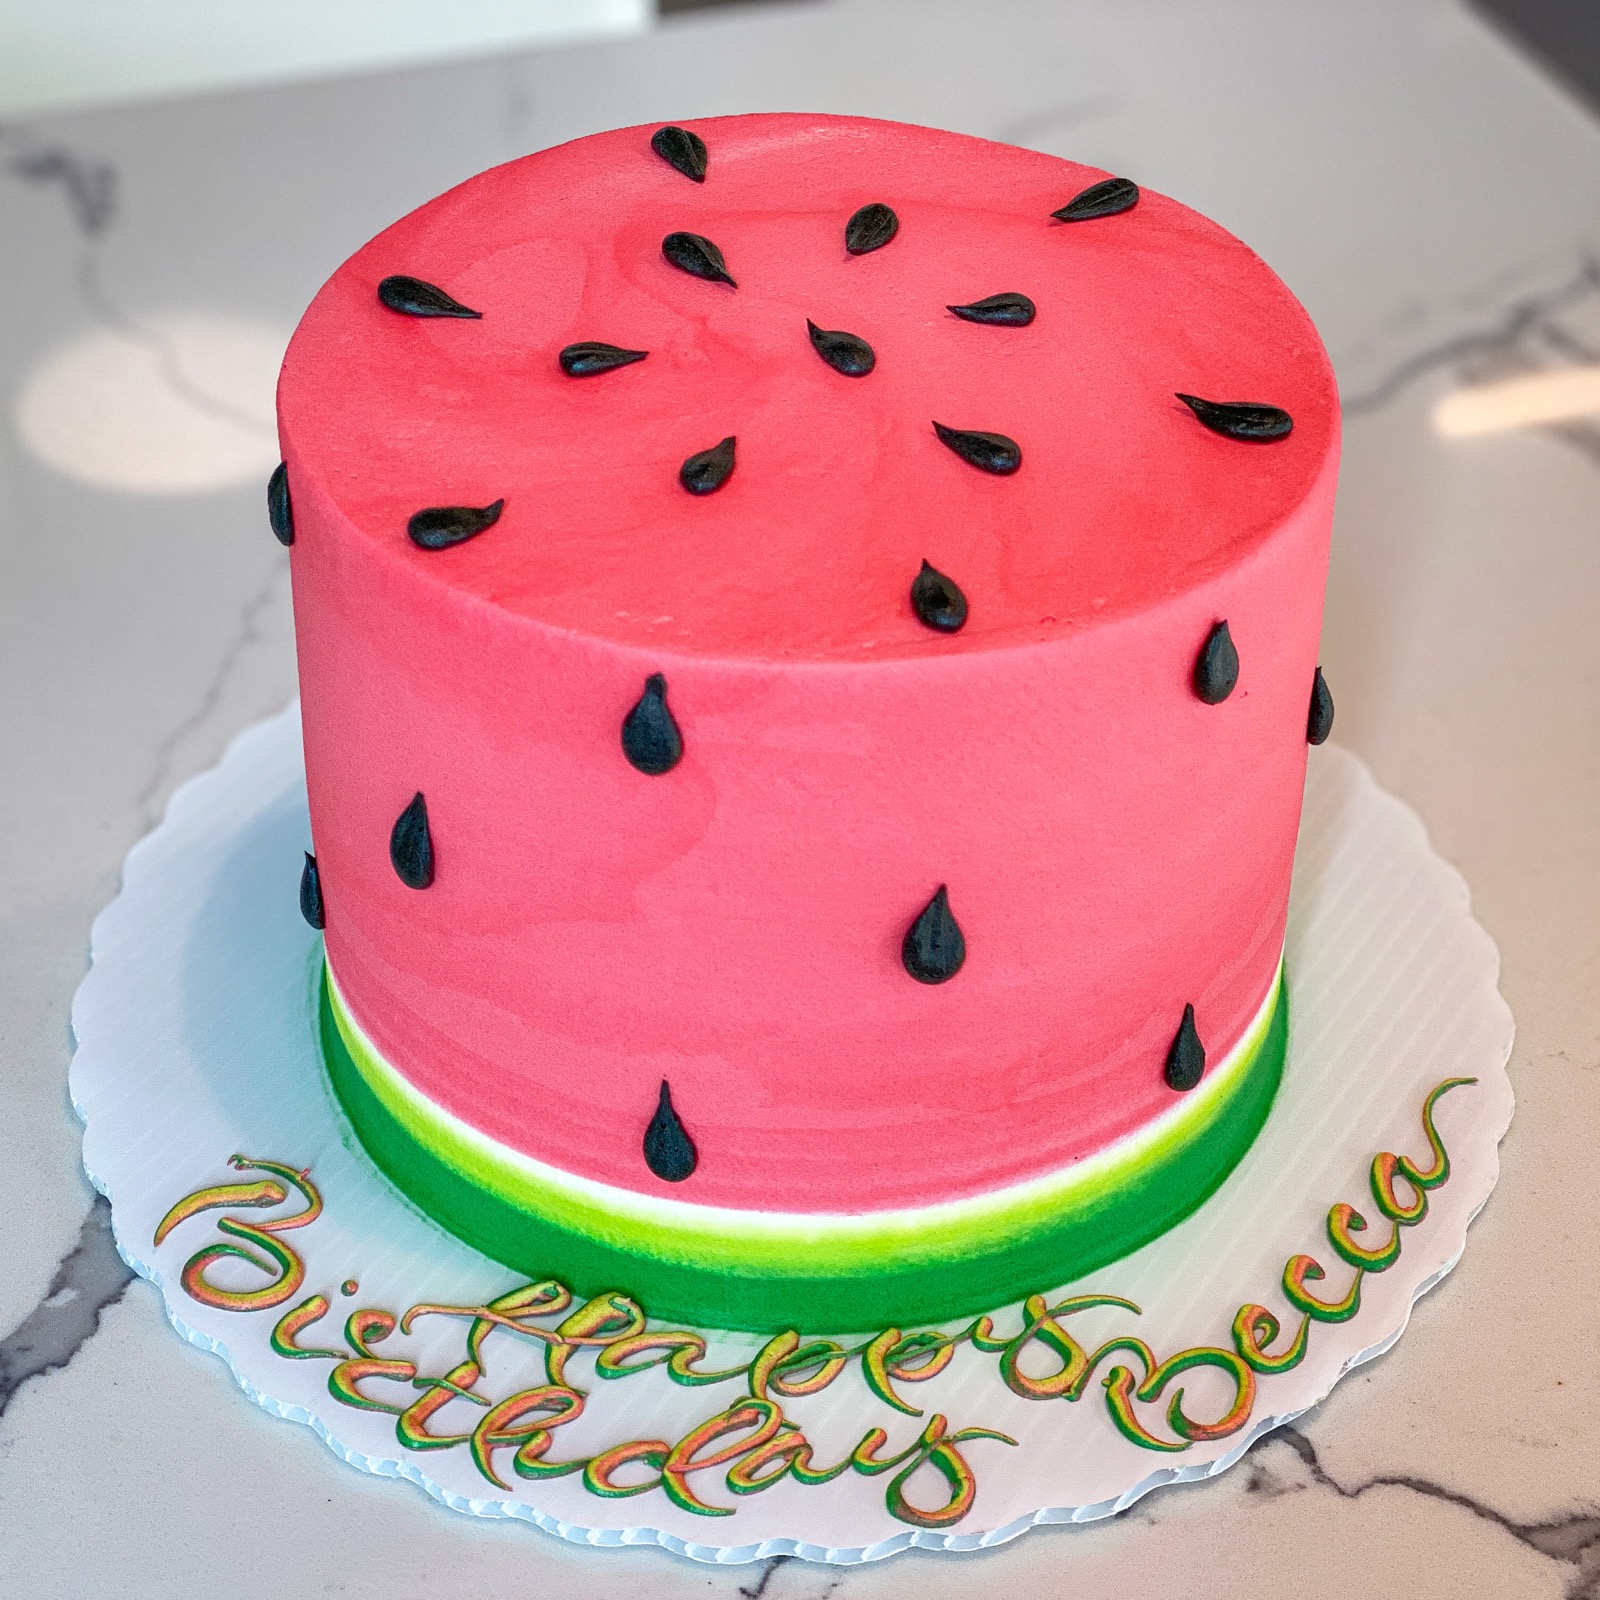 CoComelonServes 20 - We Create Delicious Memories - Oakmont Bakery